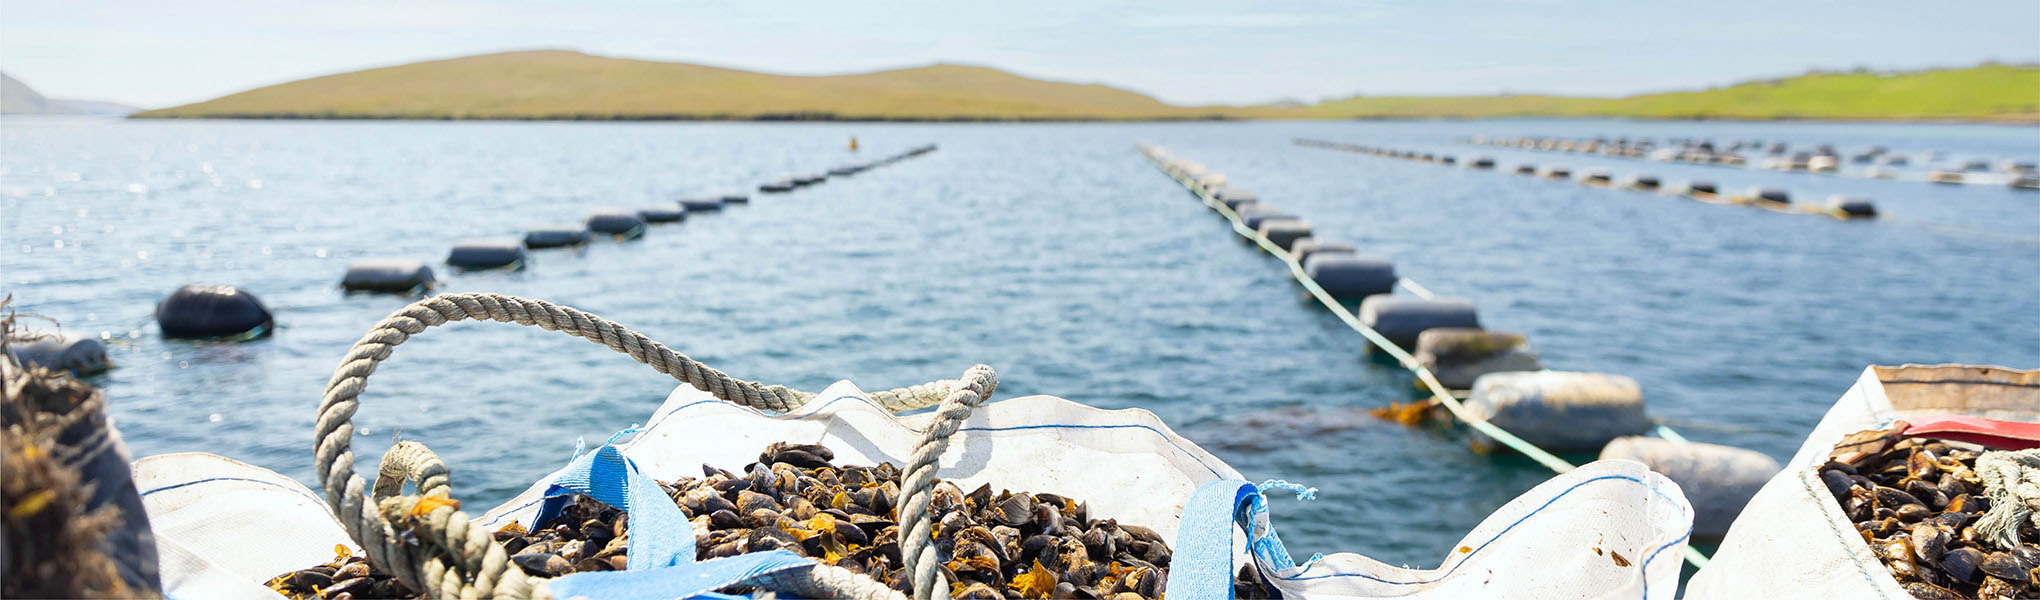 Mussels and mussel farm in background